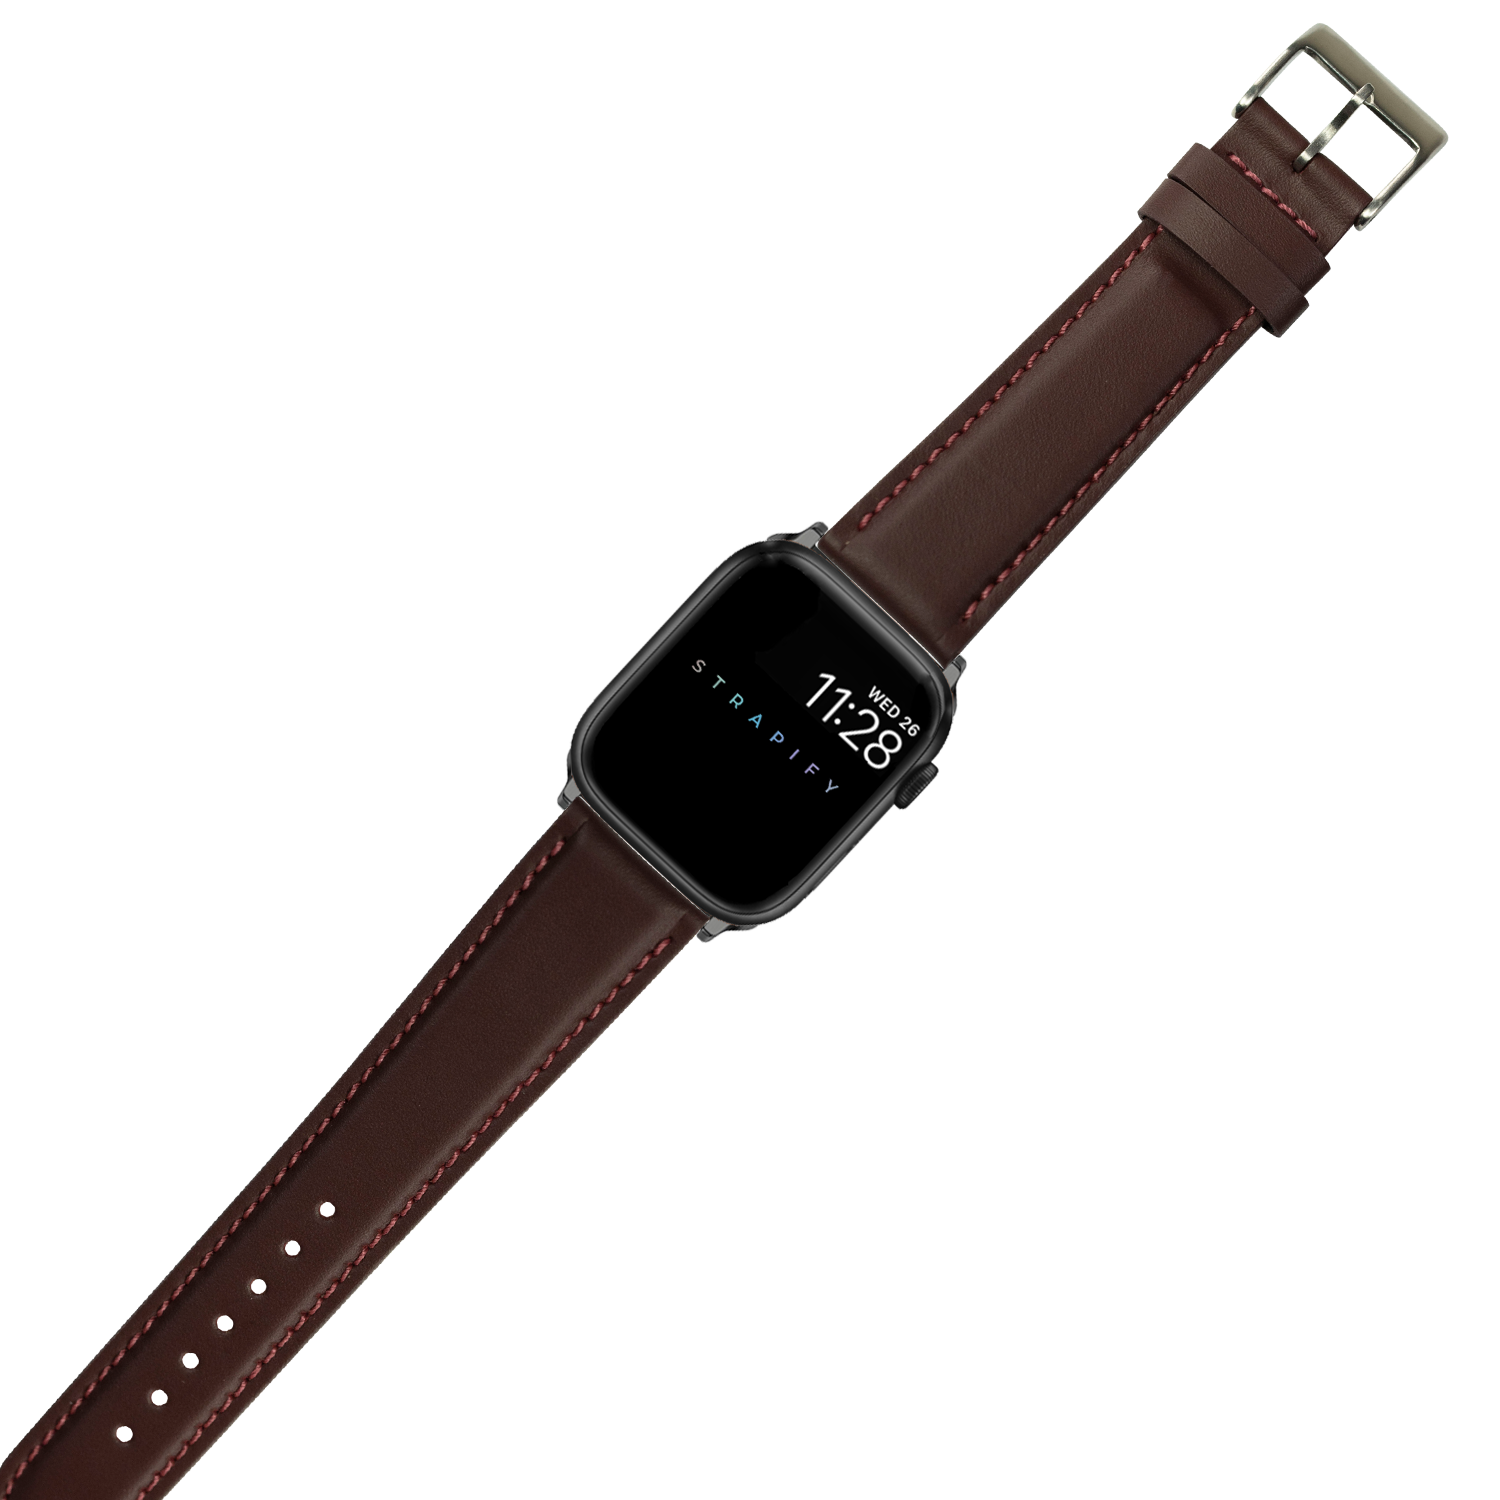 [Apple Watch] Padded Leather - Bordeaux